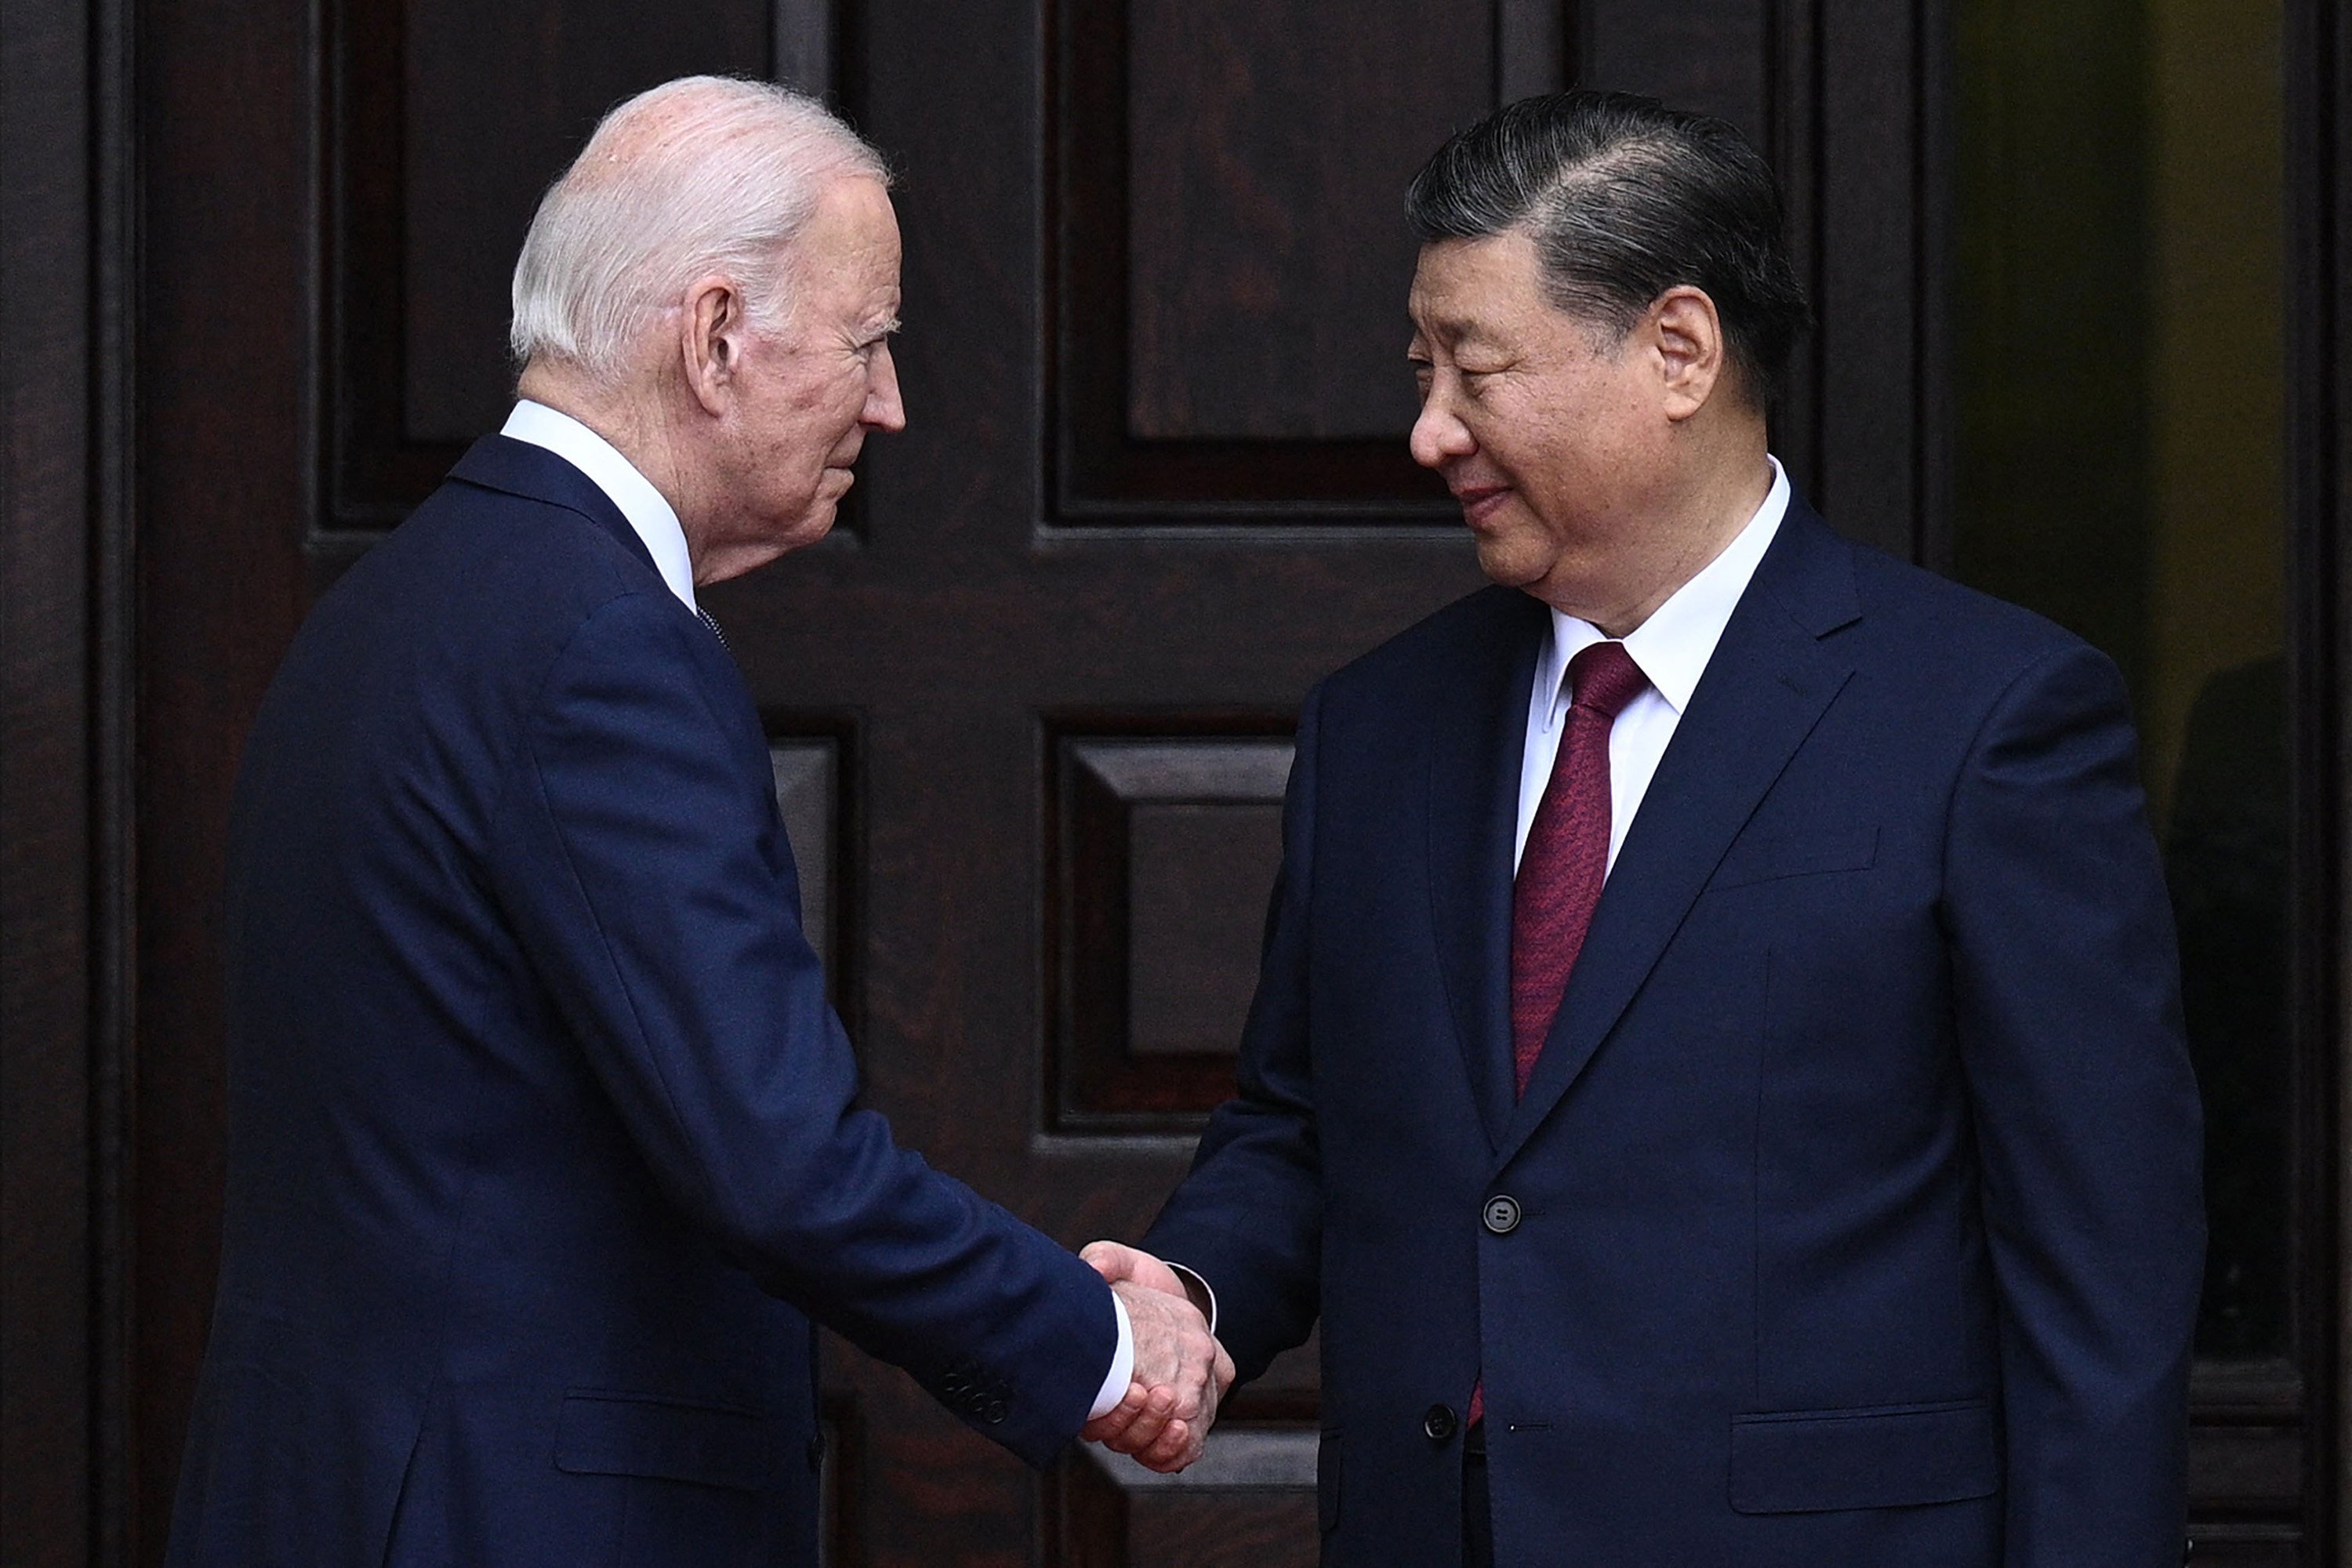 US President Joe Biden greets Chinese President Xi Jinping before a meeting in Woodside, California, on November 15. Photo: AFP / Getty Images / TNS